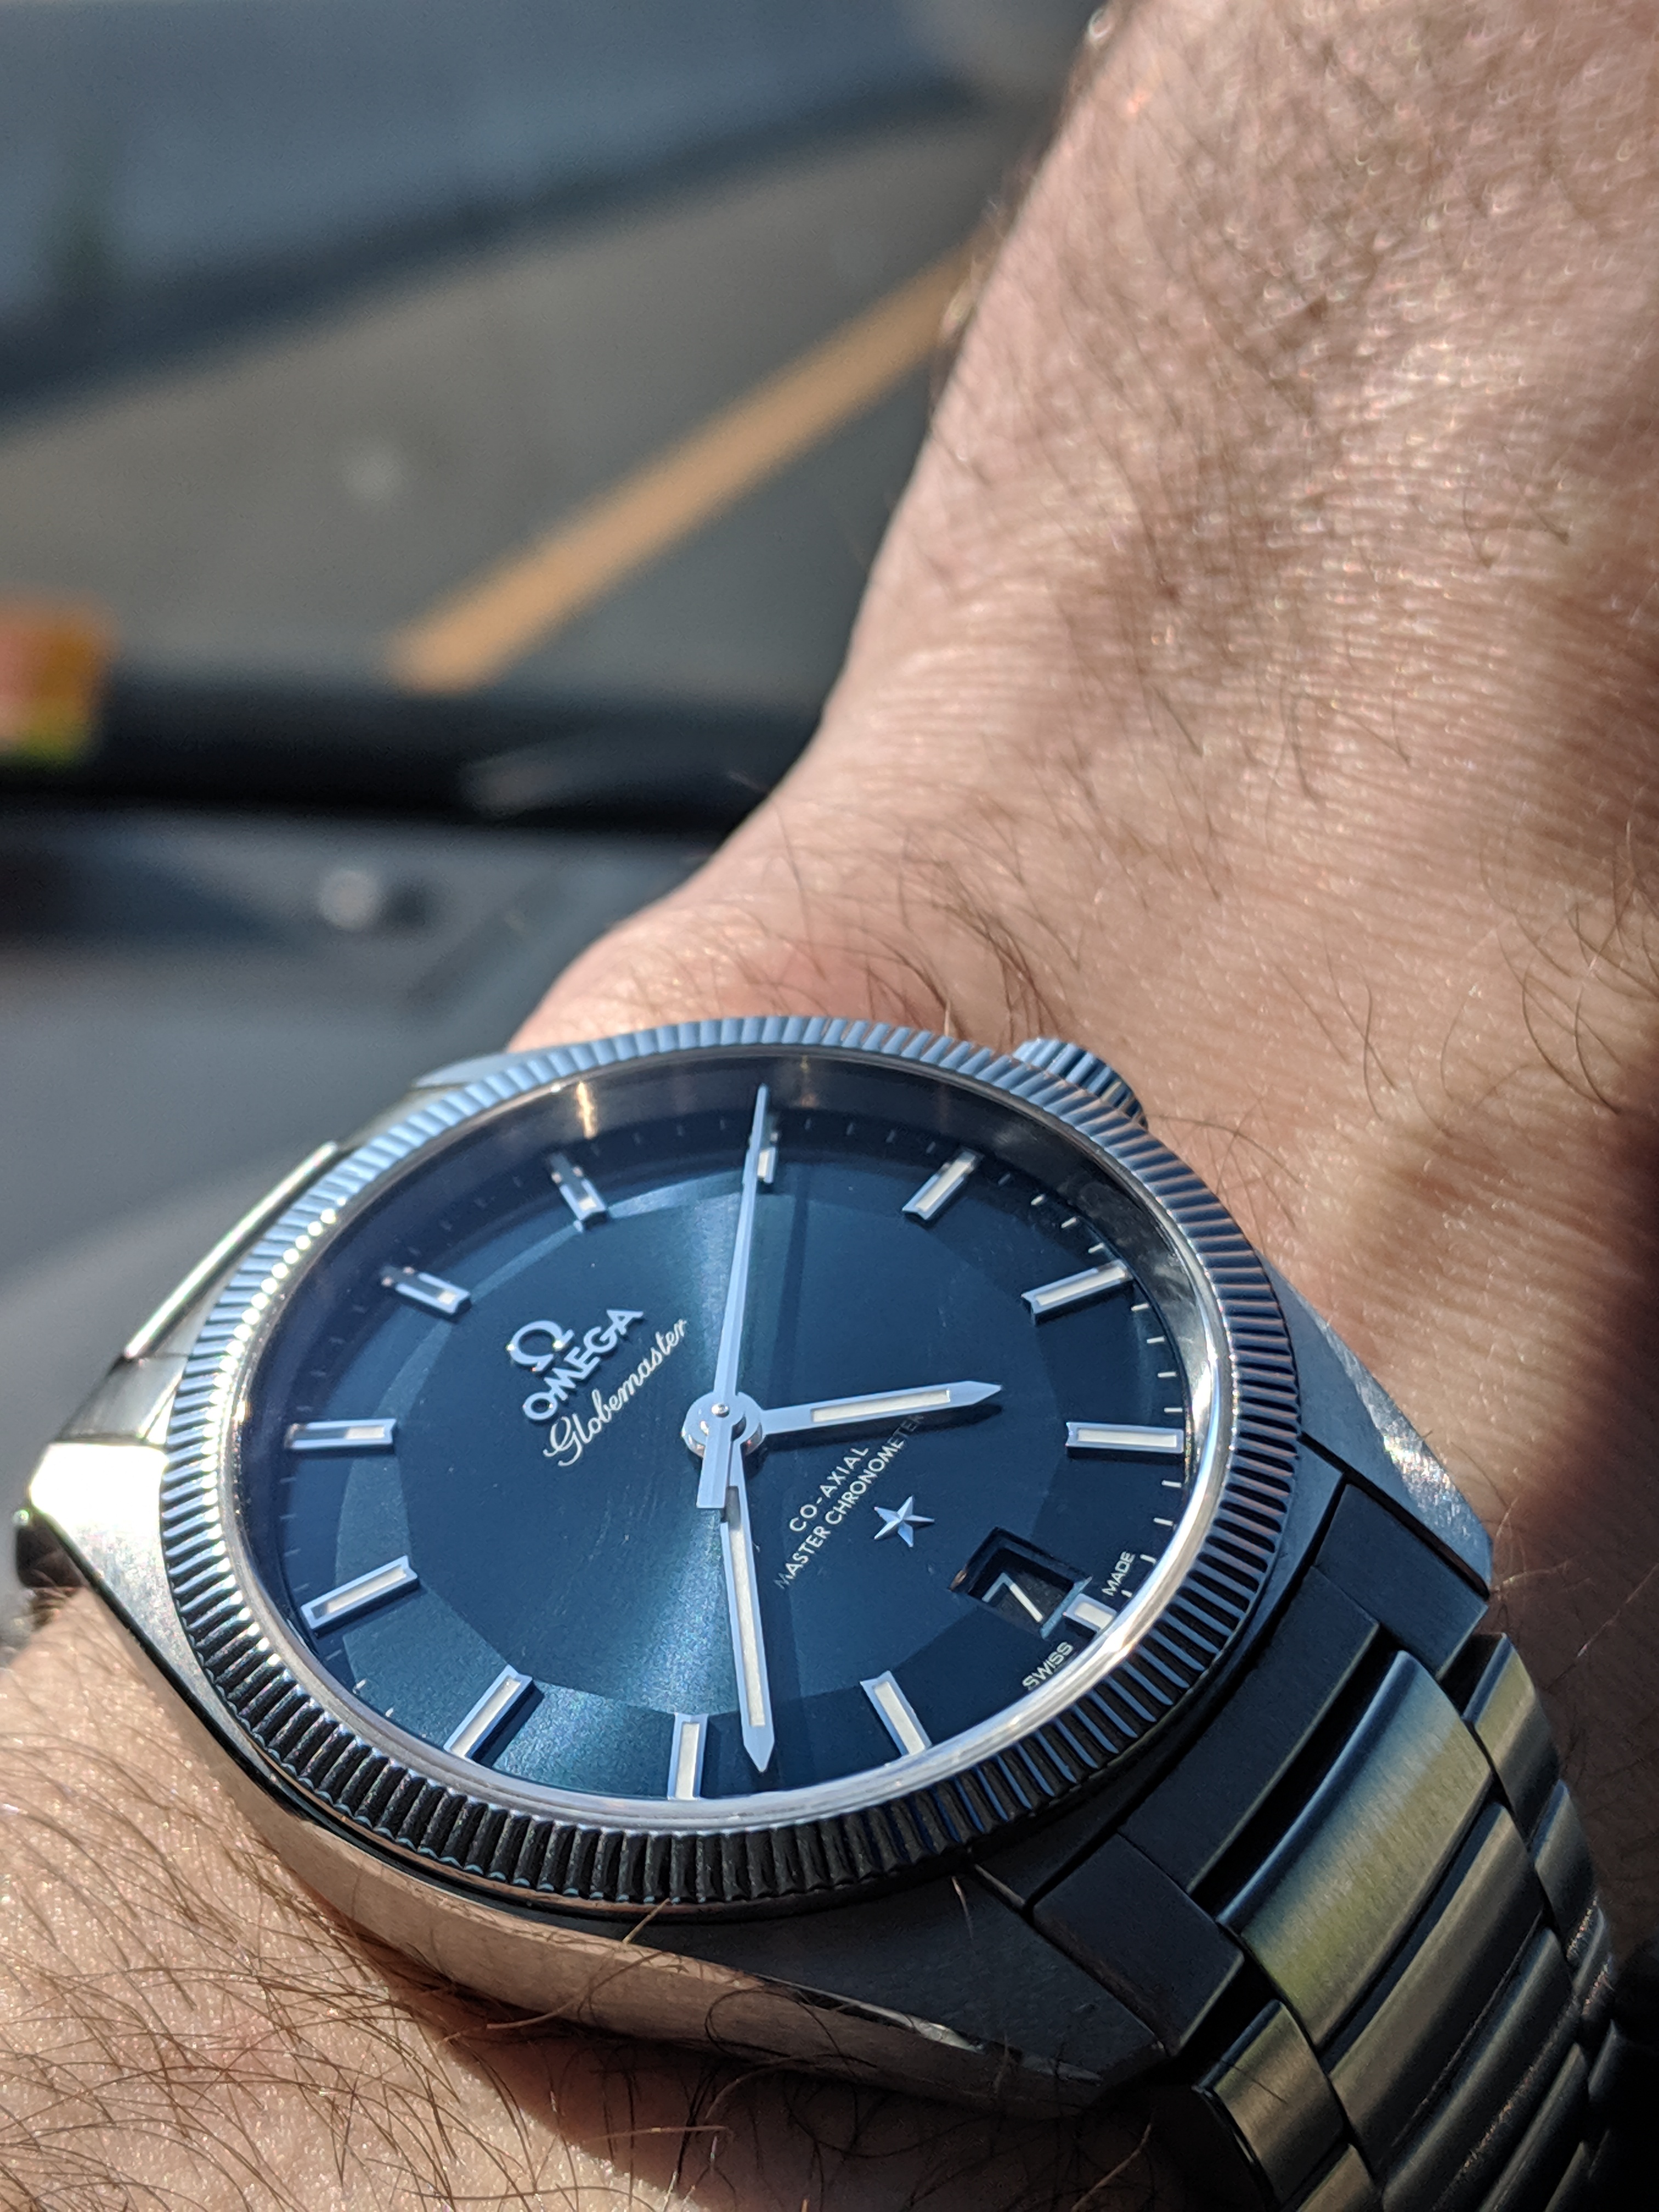 TheOneInYellow on Twitter omegawatches Yep my fav is also what I own  Omega Constellation Globemaster bracelet version Ref 13030392103001  over the leather one in your pic  Love the everchanging blue dial